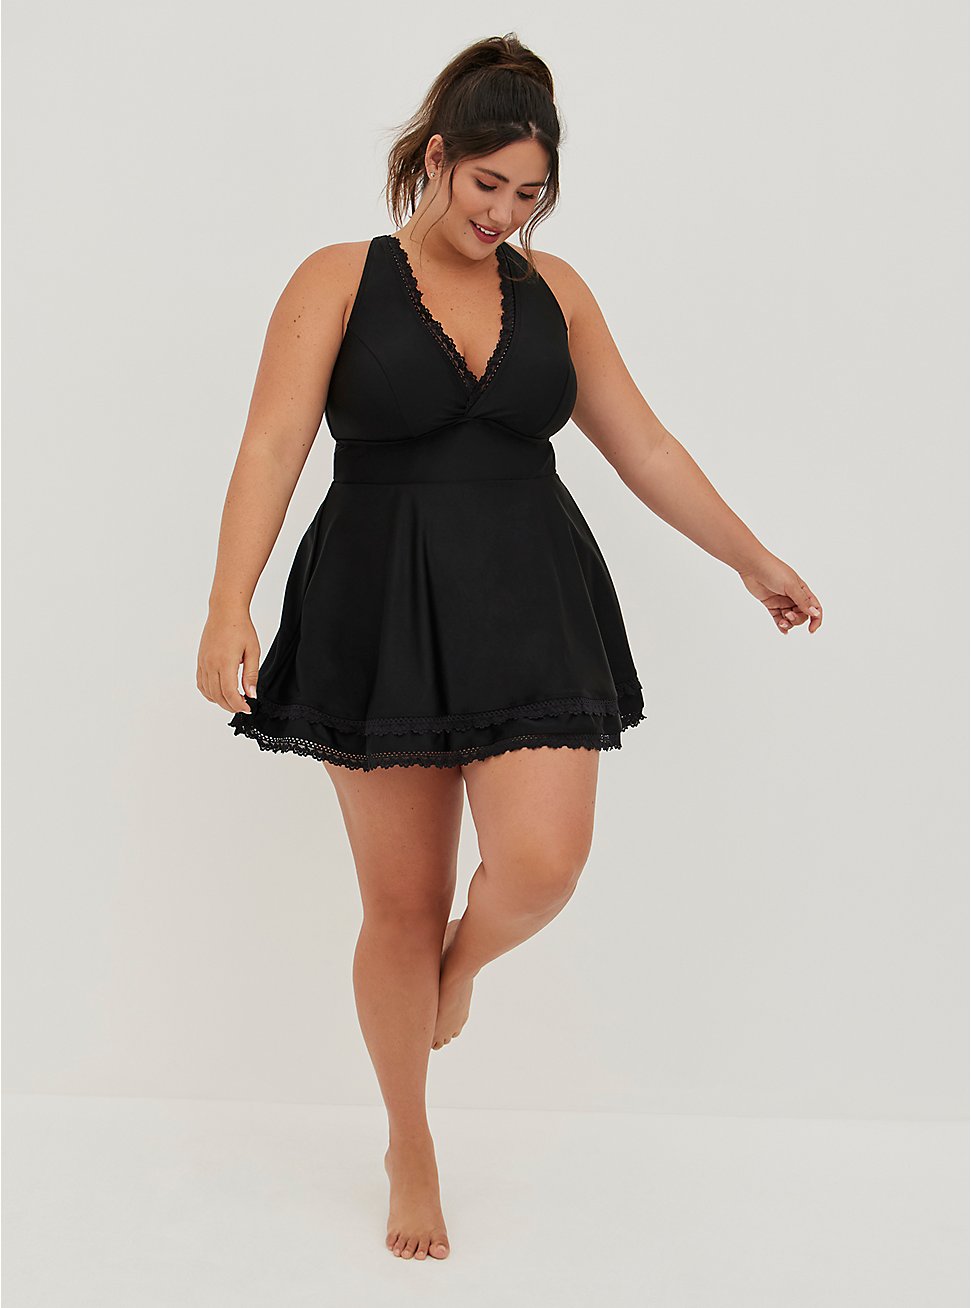 Wireless Mid Lace Trimmed Swim Dress With Brief, DEEP BLACK, hi-res